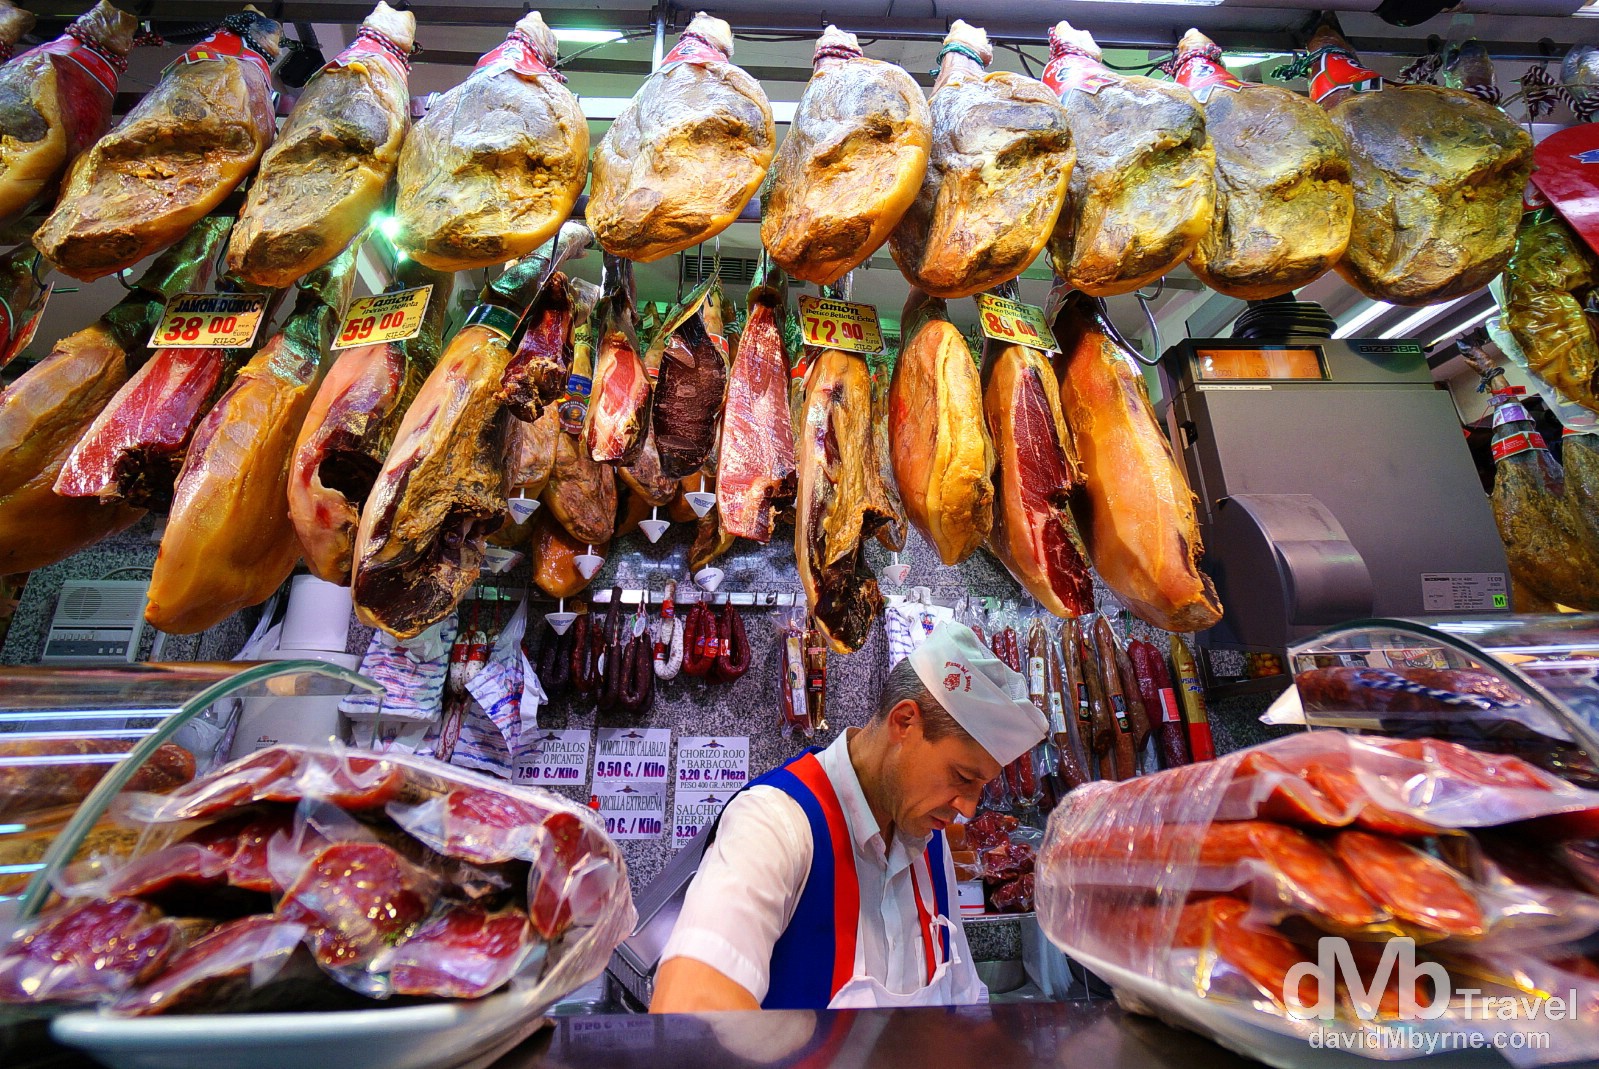 One of the many jamon (ham) shops in Madrid, Spain. June 14th, 2014.